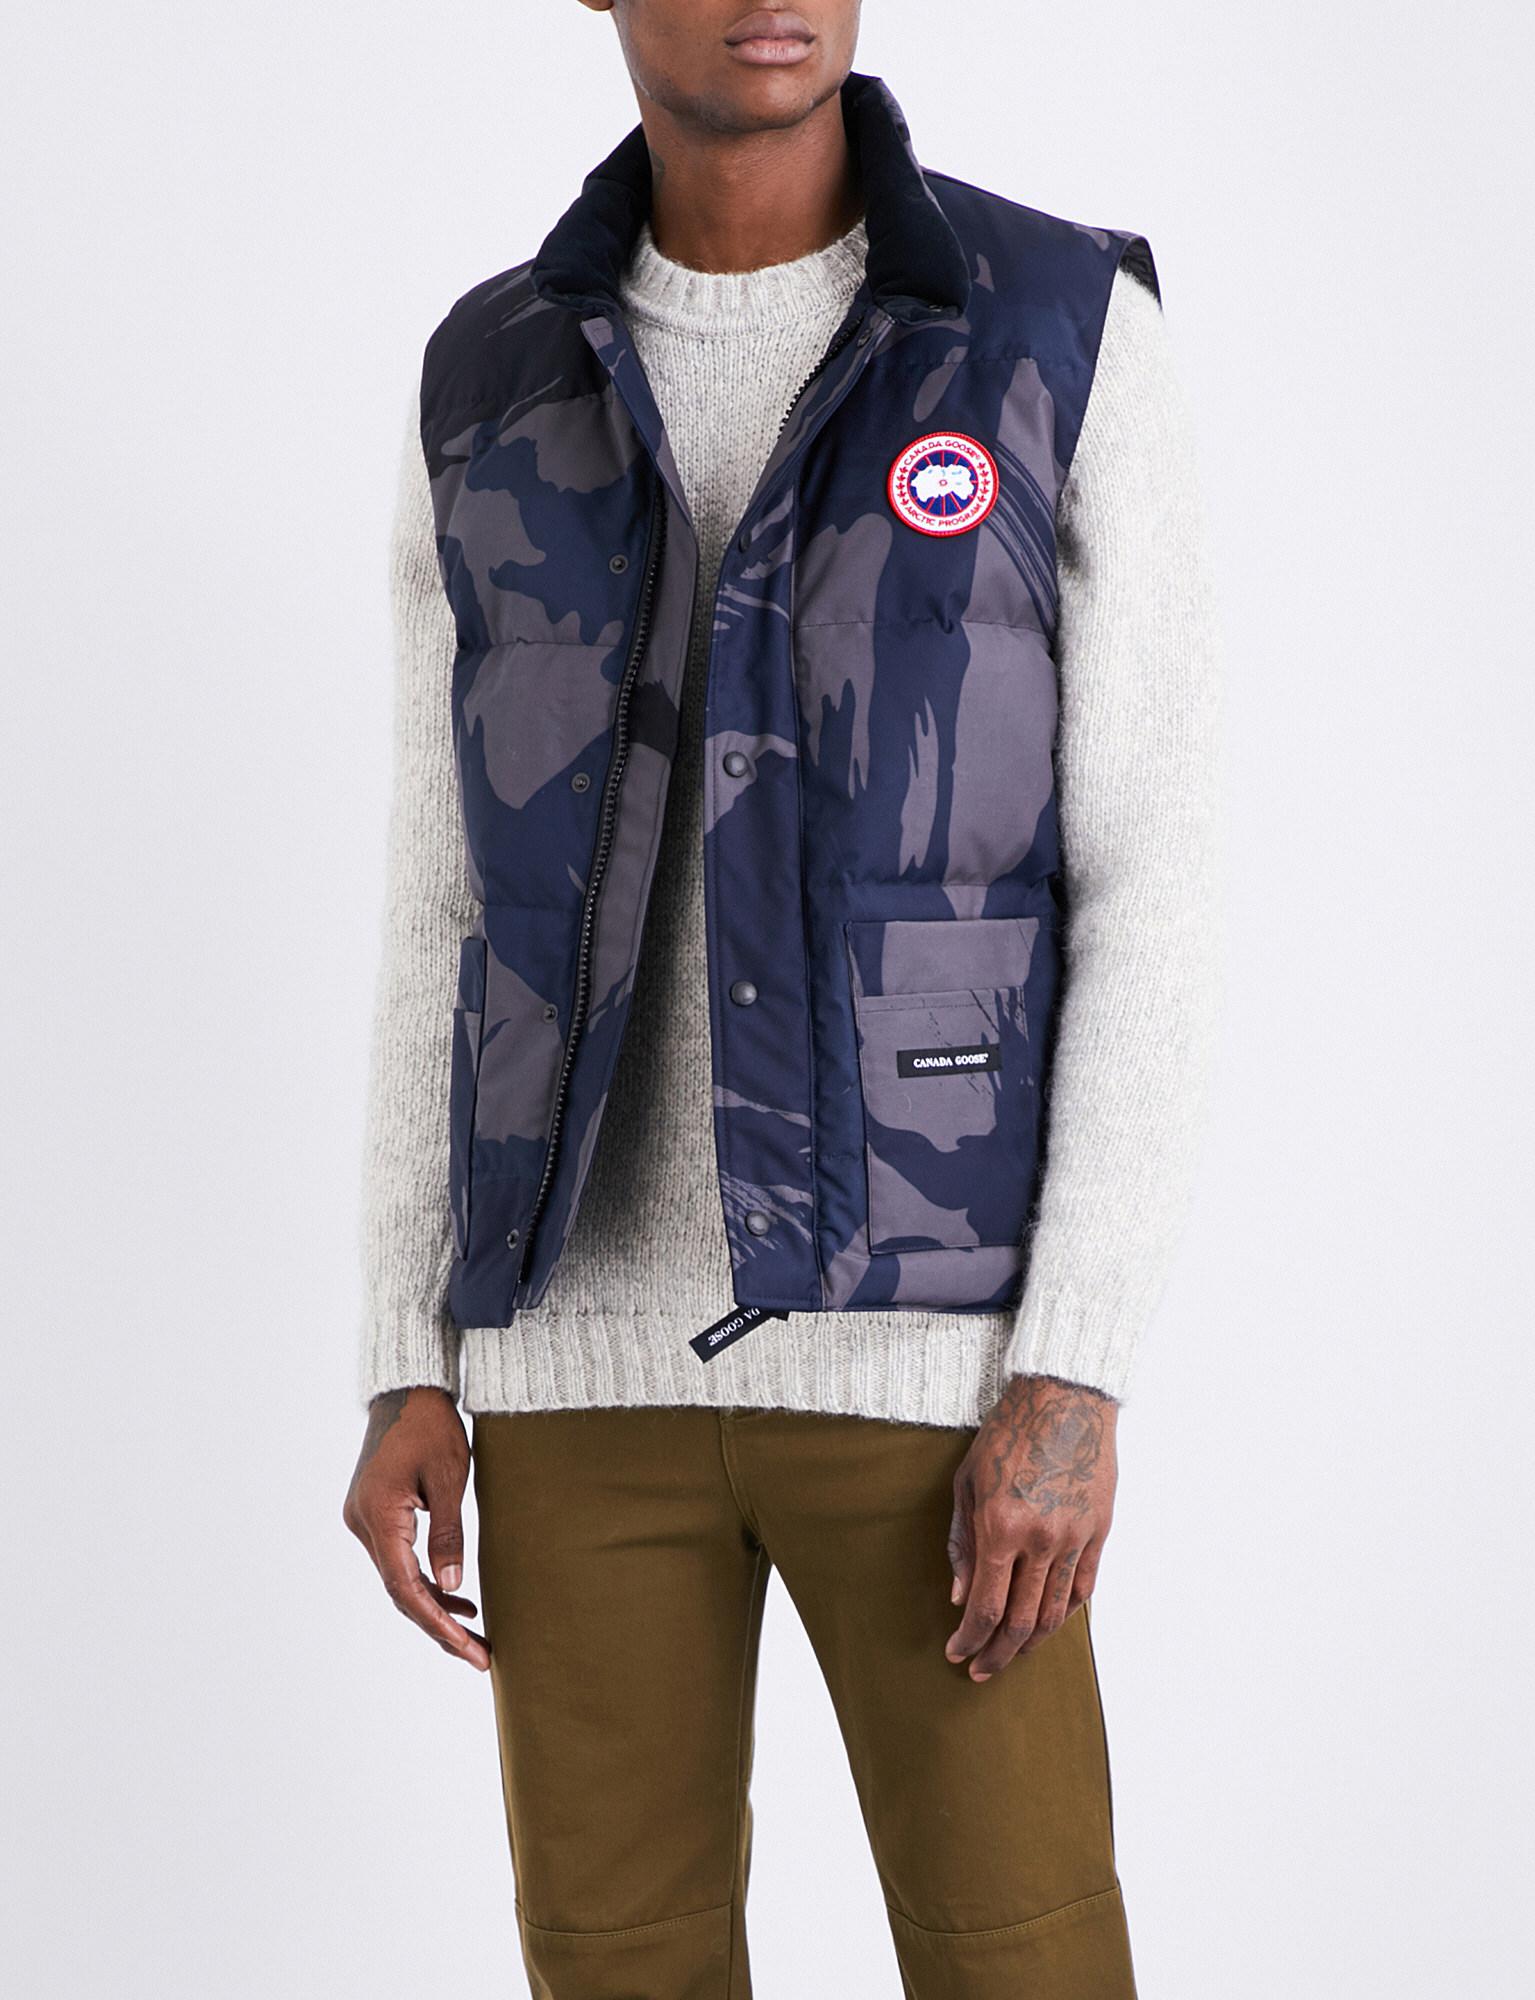 Camo Canada Goose Gilet Hotsell, 60% OFF | www.sushithaionline.com